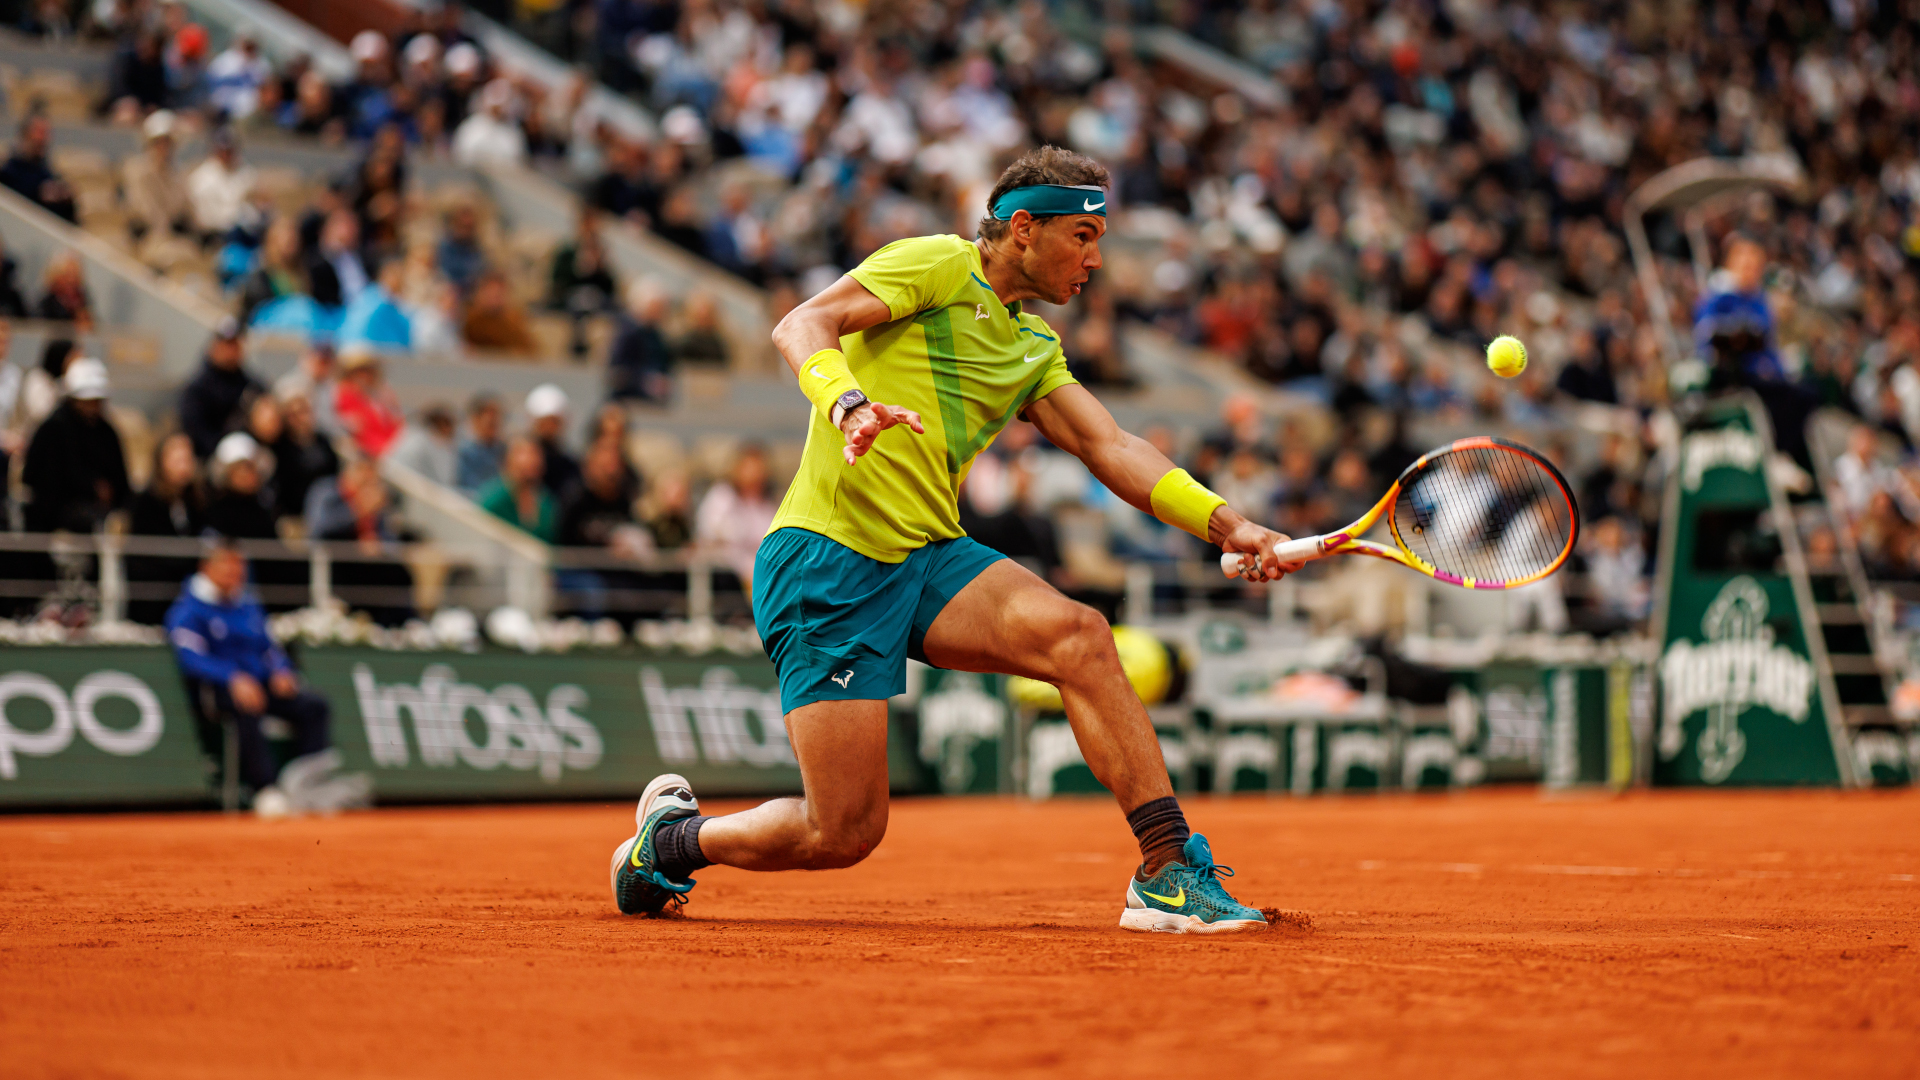 Rafa Nadal digs out a forehand at the 2022 French Open